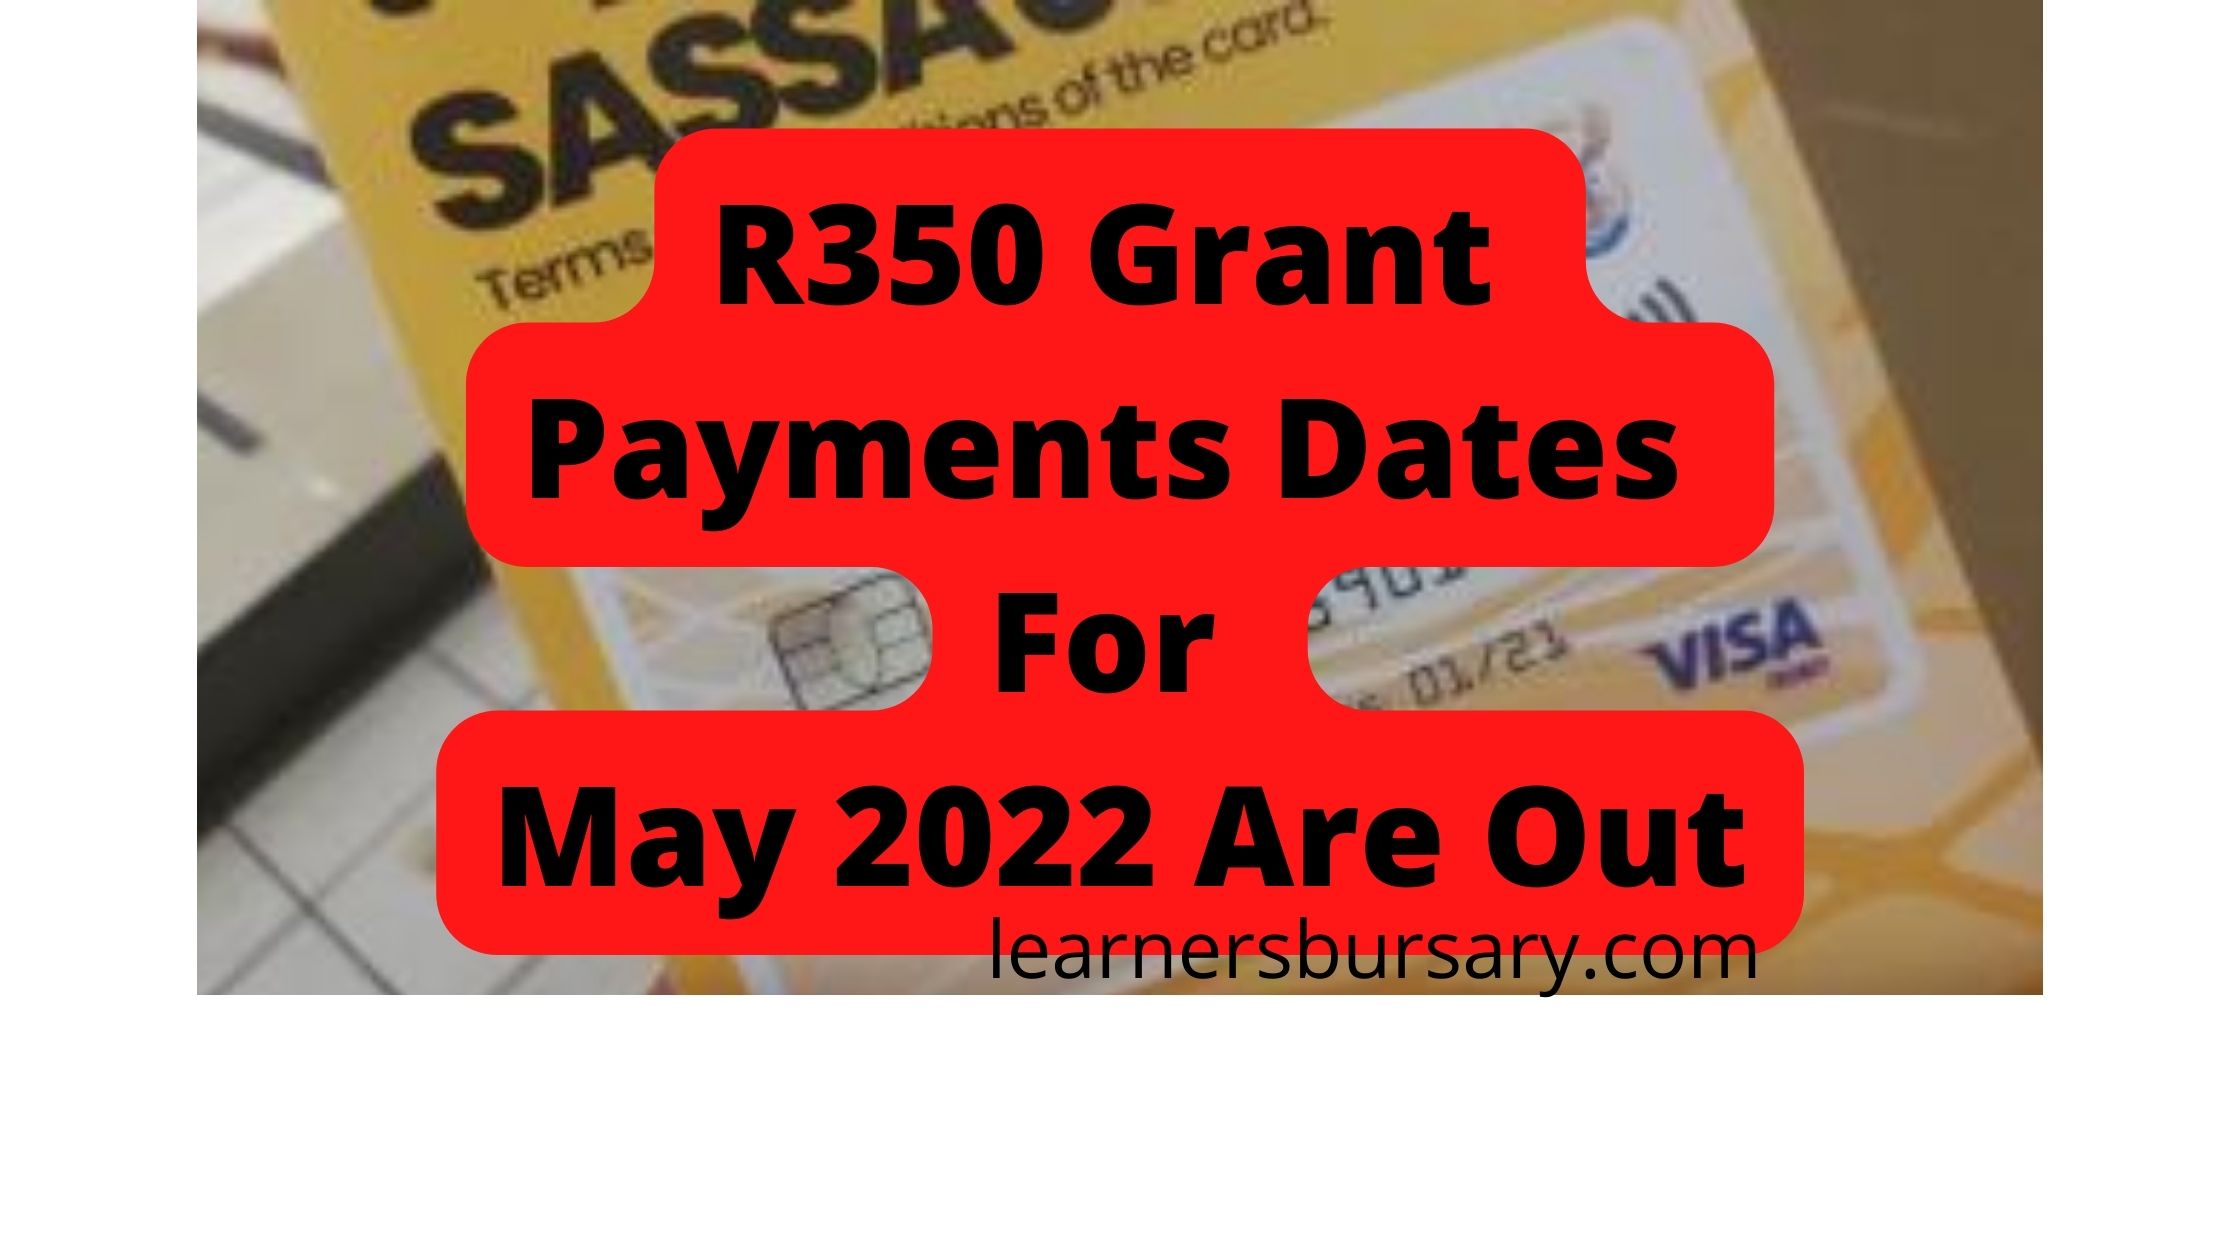 R350 Grant Payments Dates For May 2022 Are Out